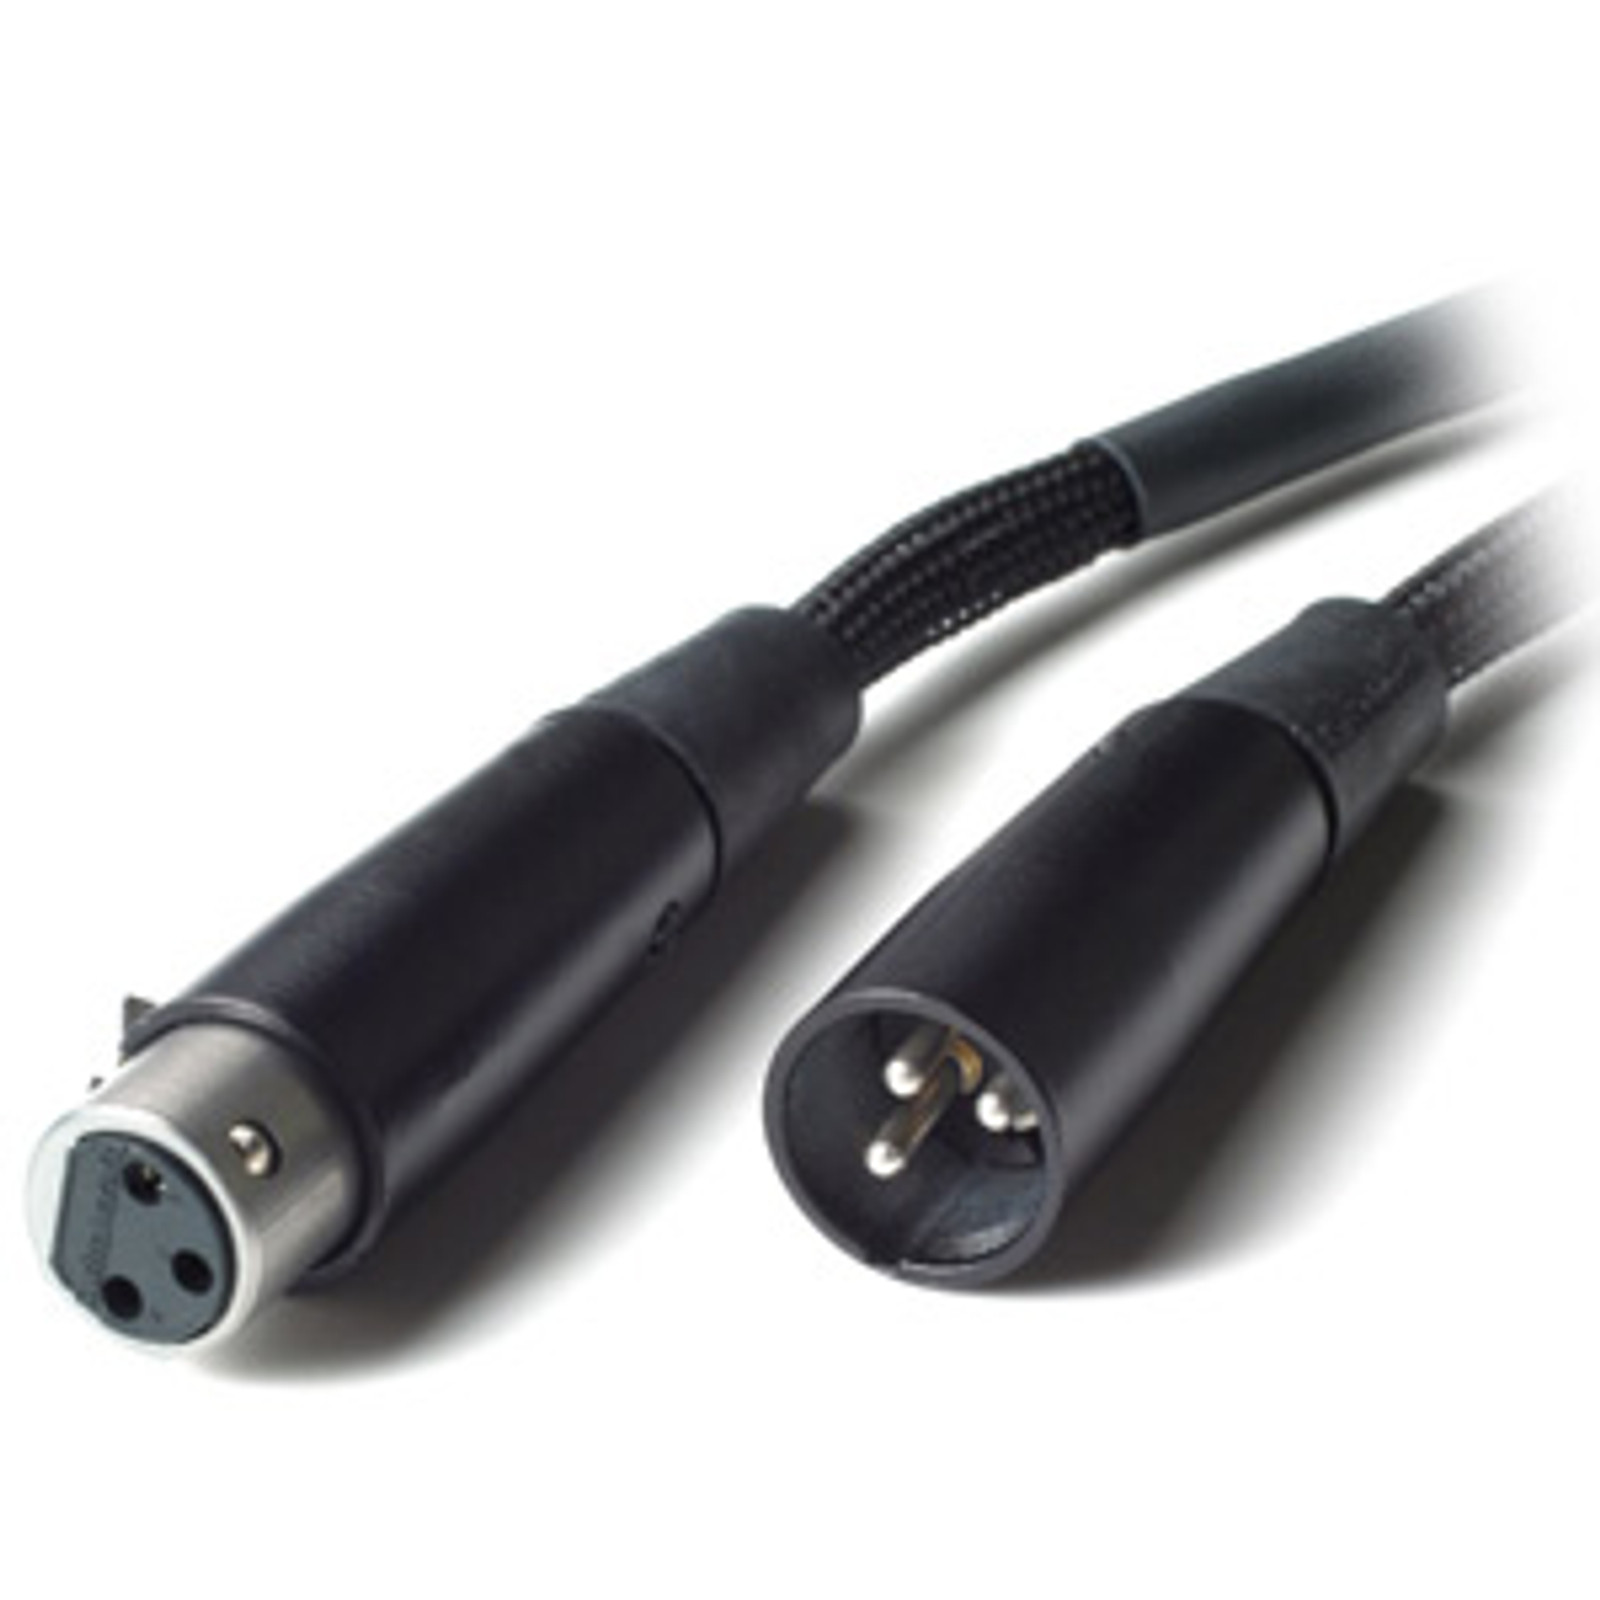 Kimber Kable Hero Interconnect Cable - 1.0 Meter - XLR to XLR - Pair